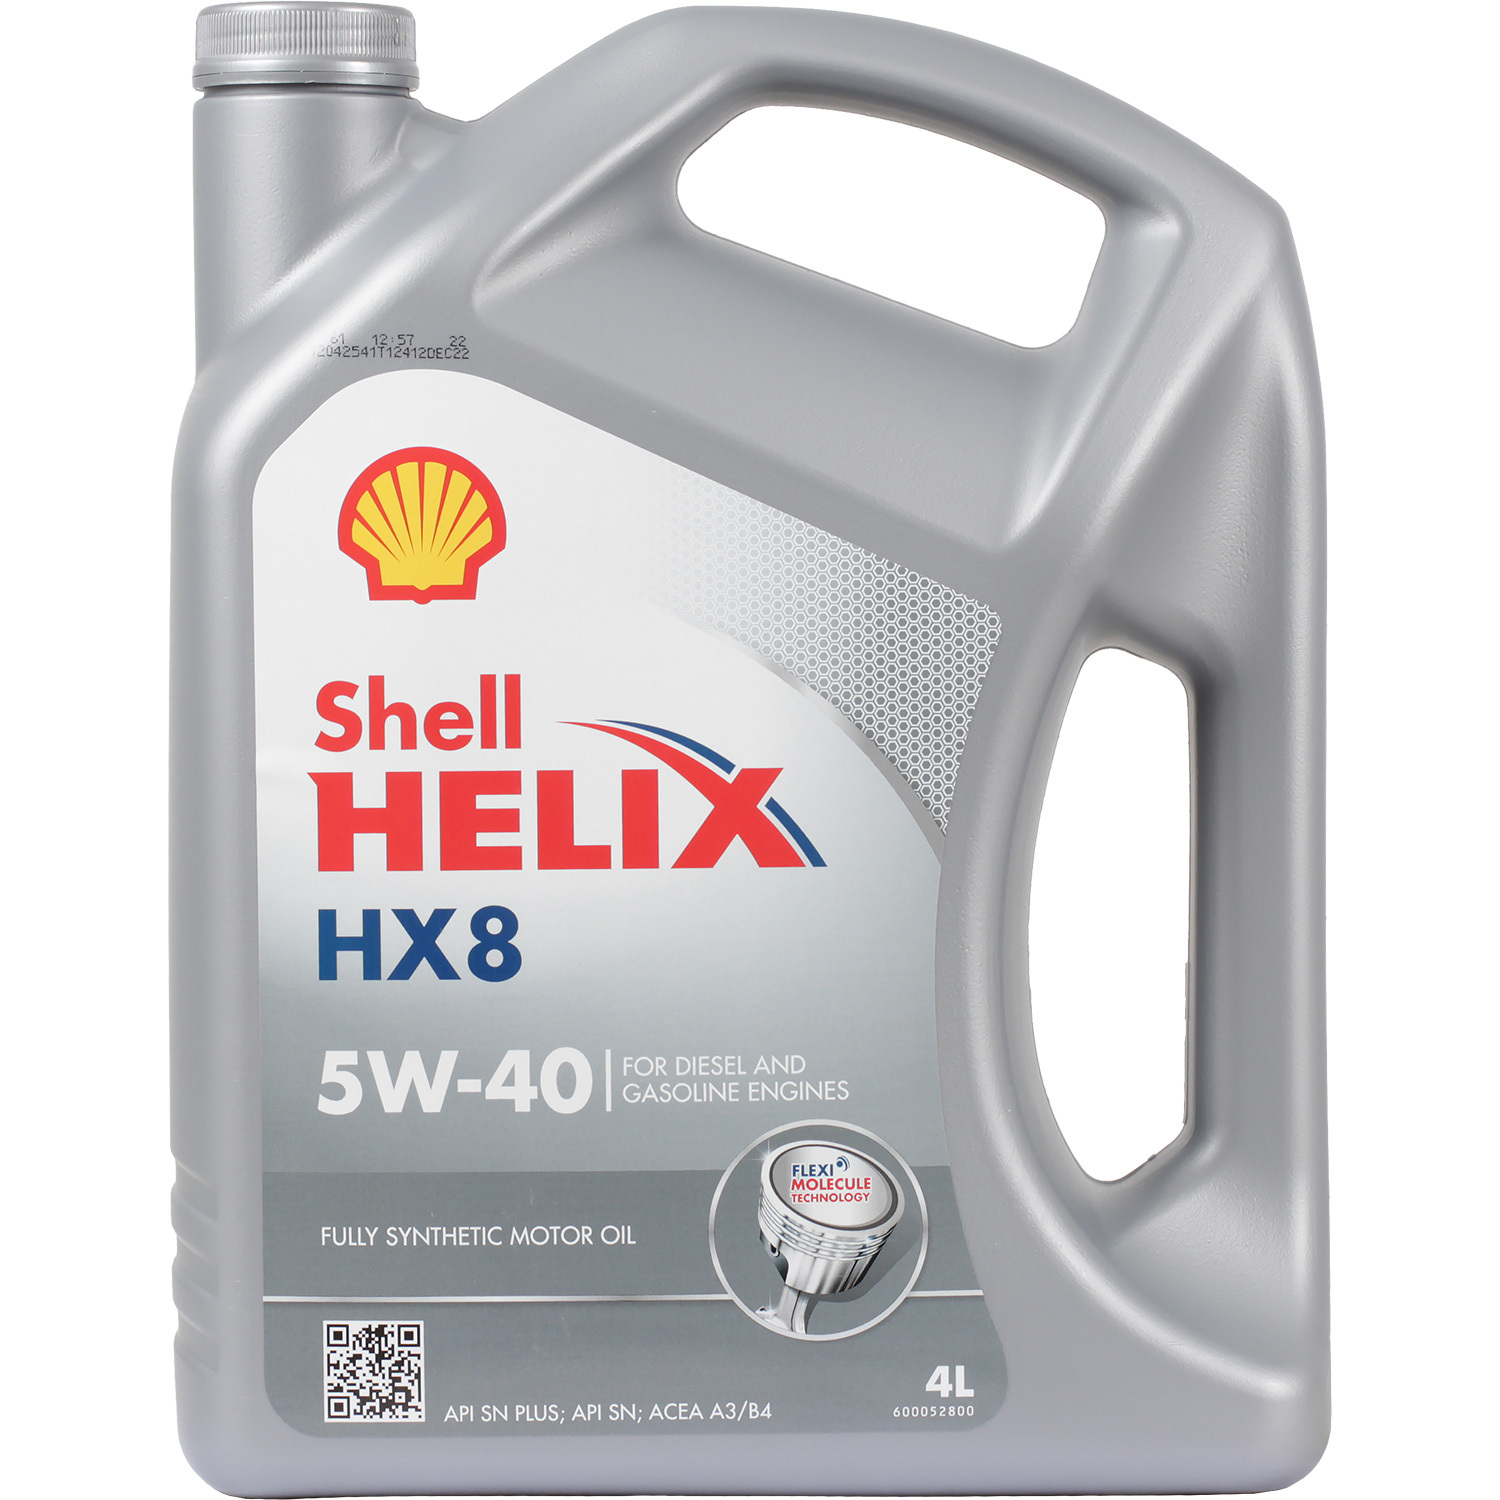 Shell Моторное масло Shell Helix HX8 5W-40, 4 л shell моторное масло shell helix hx8 5w 30 1 л